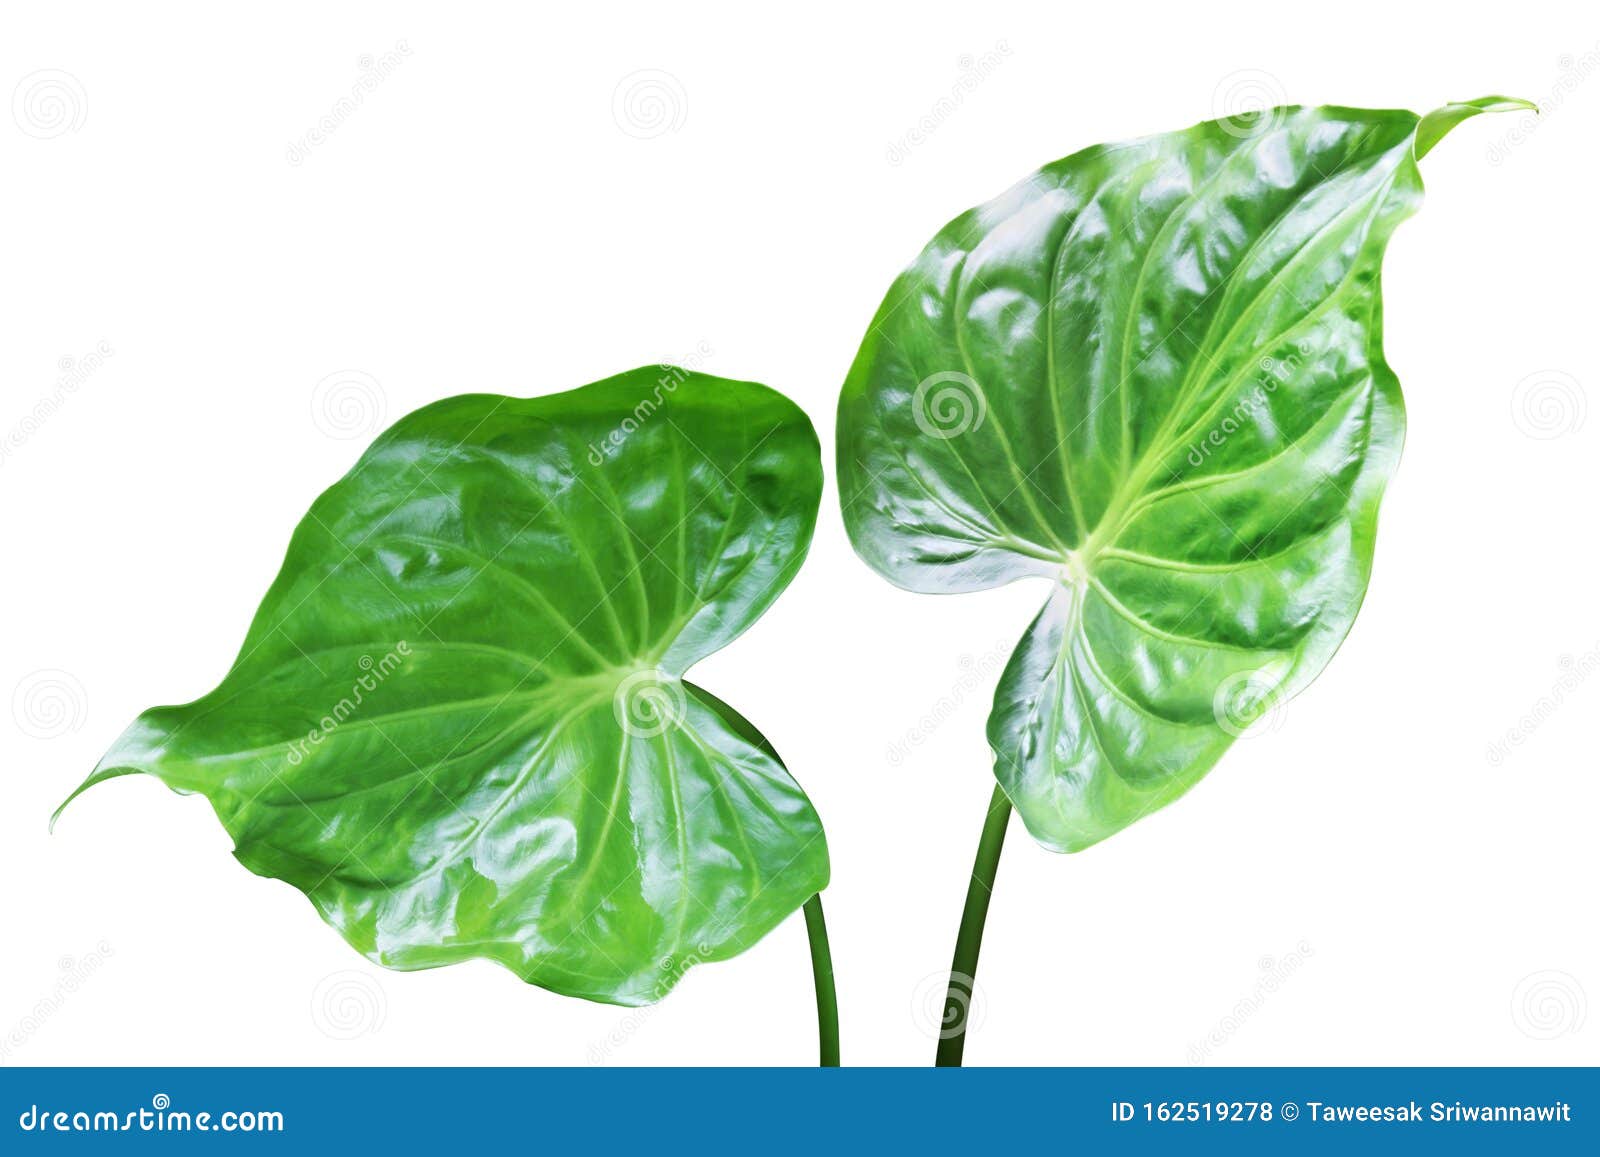 Green Leaves of Buddha S Hand, Elephant Ear Isolated on White ...